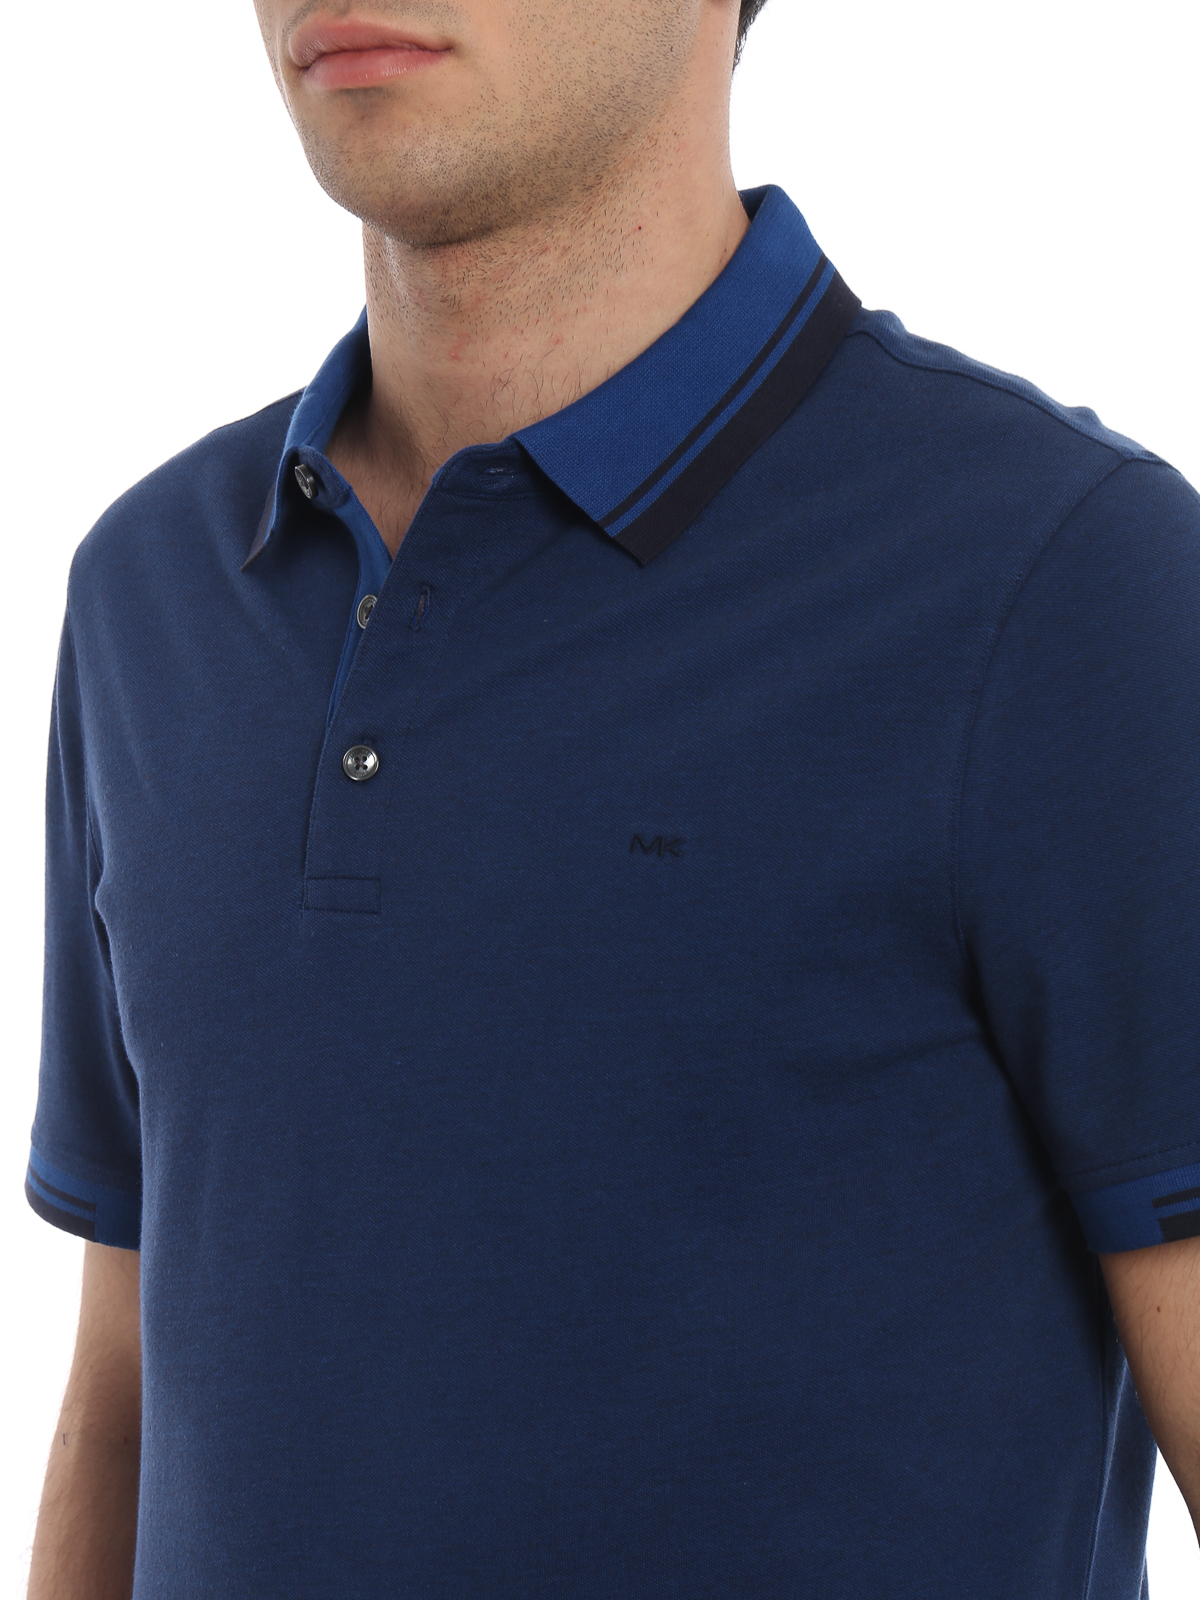 Michael Kors - Blue polo with striped 